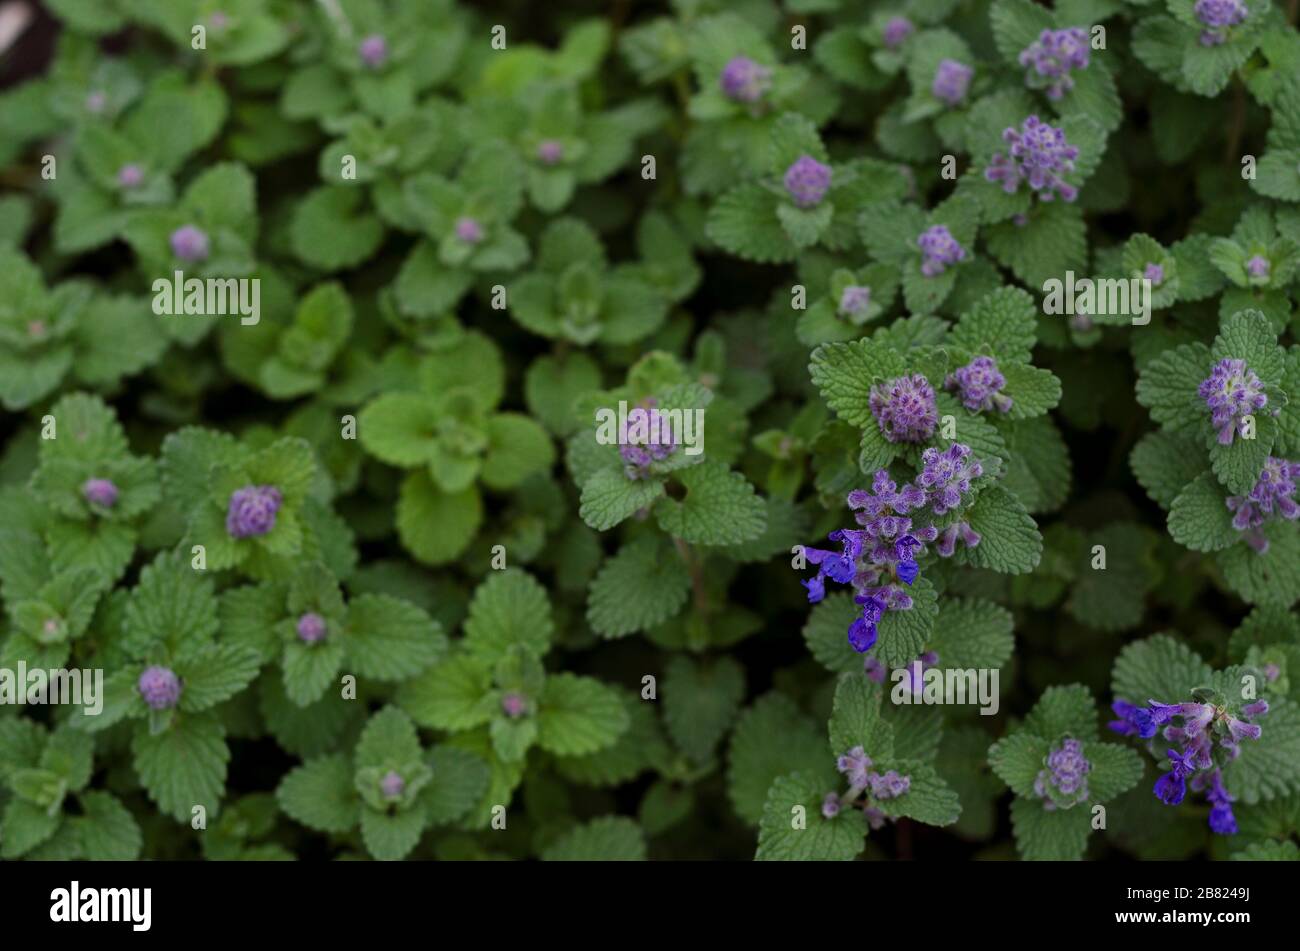 Feline mint variety with blue flowers Stock Photo